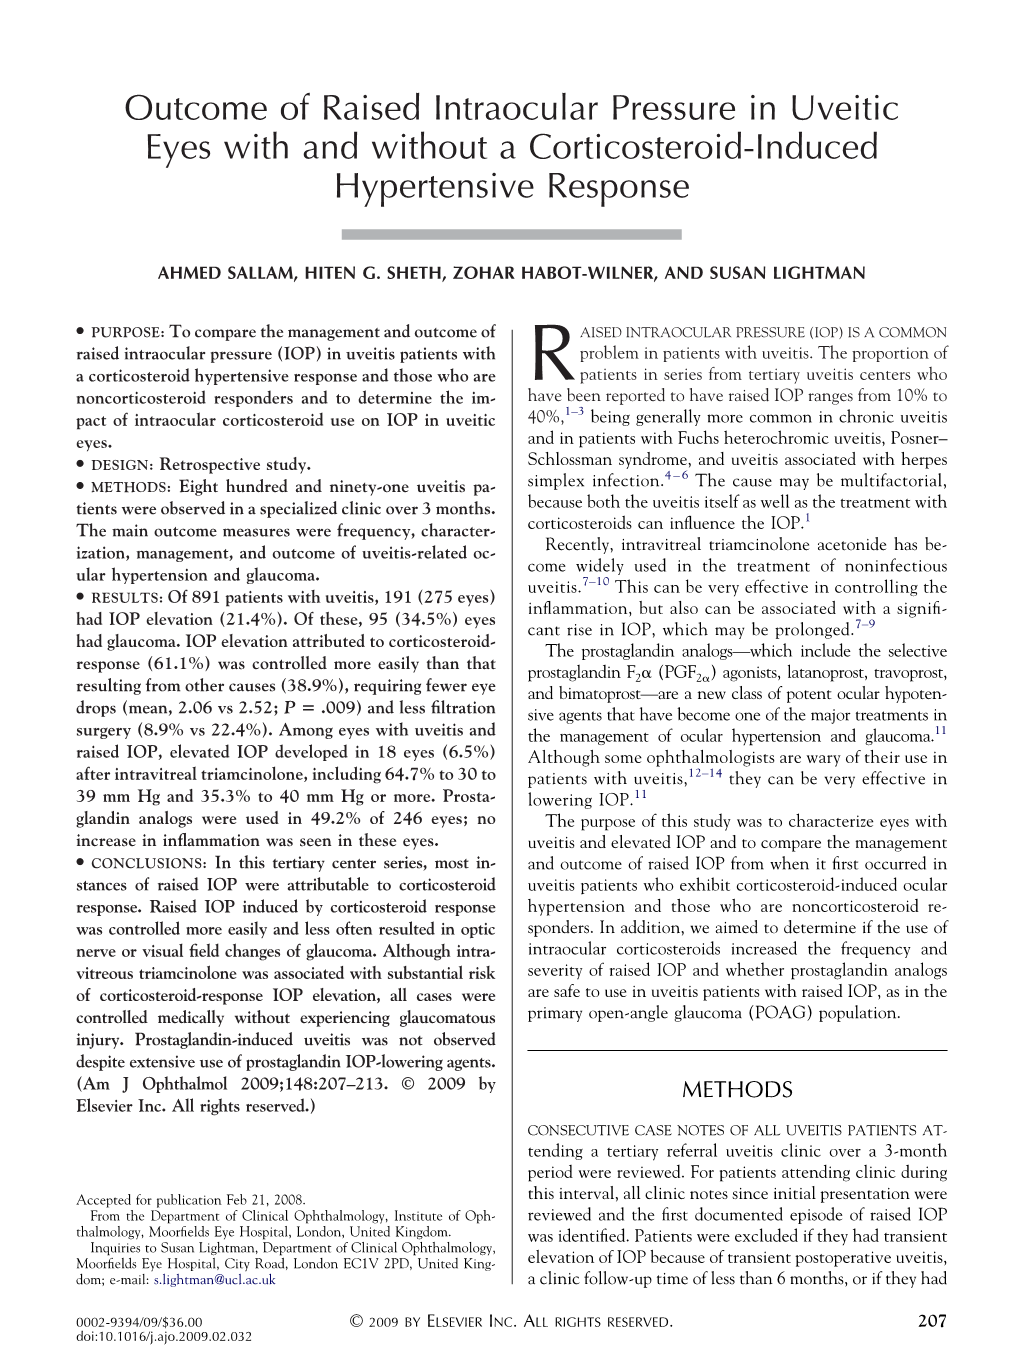 Outcome of Raised Intraocular Pressure in Uveitic Eyes with and Without a Corticosteroid-Induced Hypertensive Response